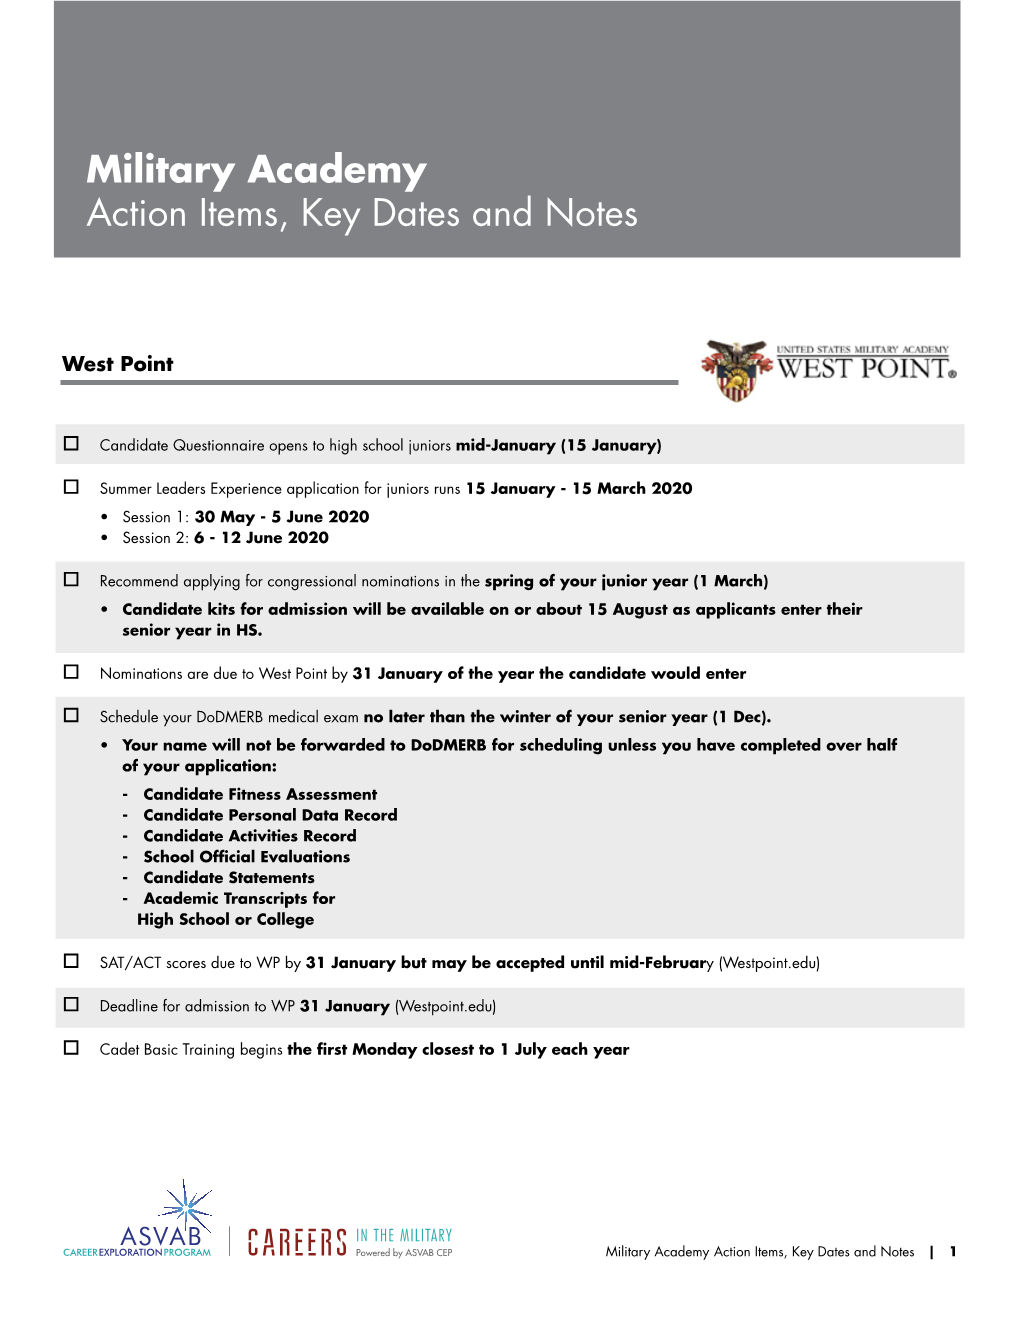 Military Academy Action Items, Key Dates and Notes